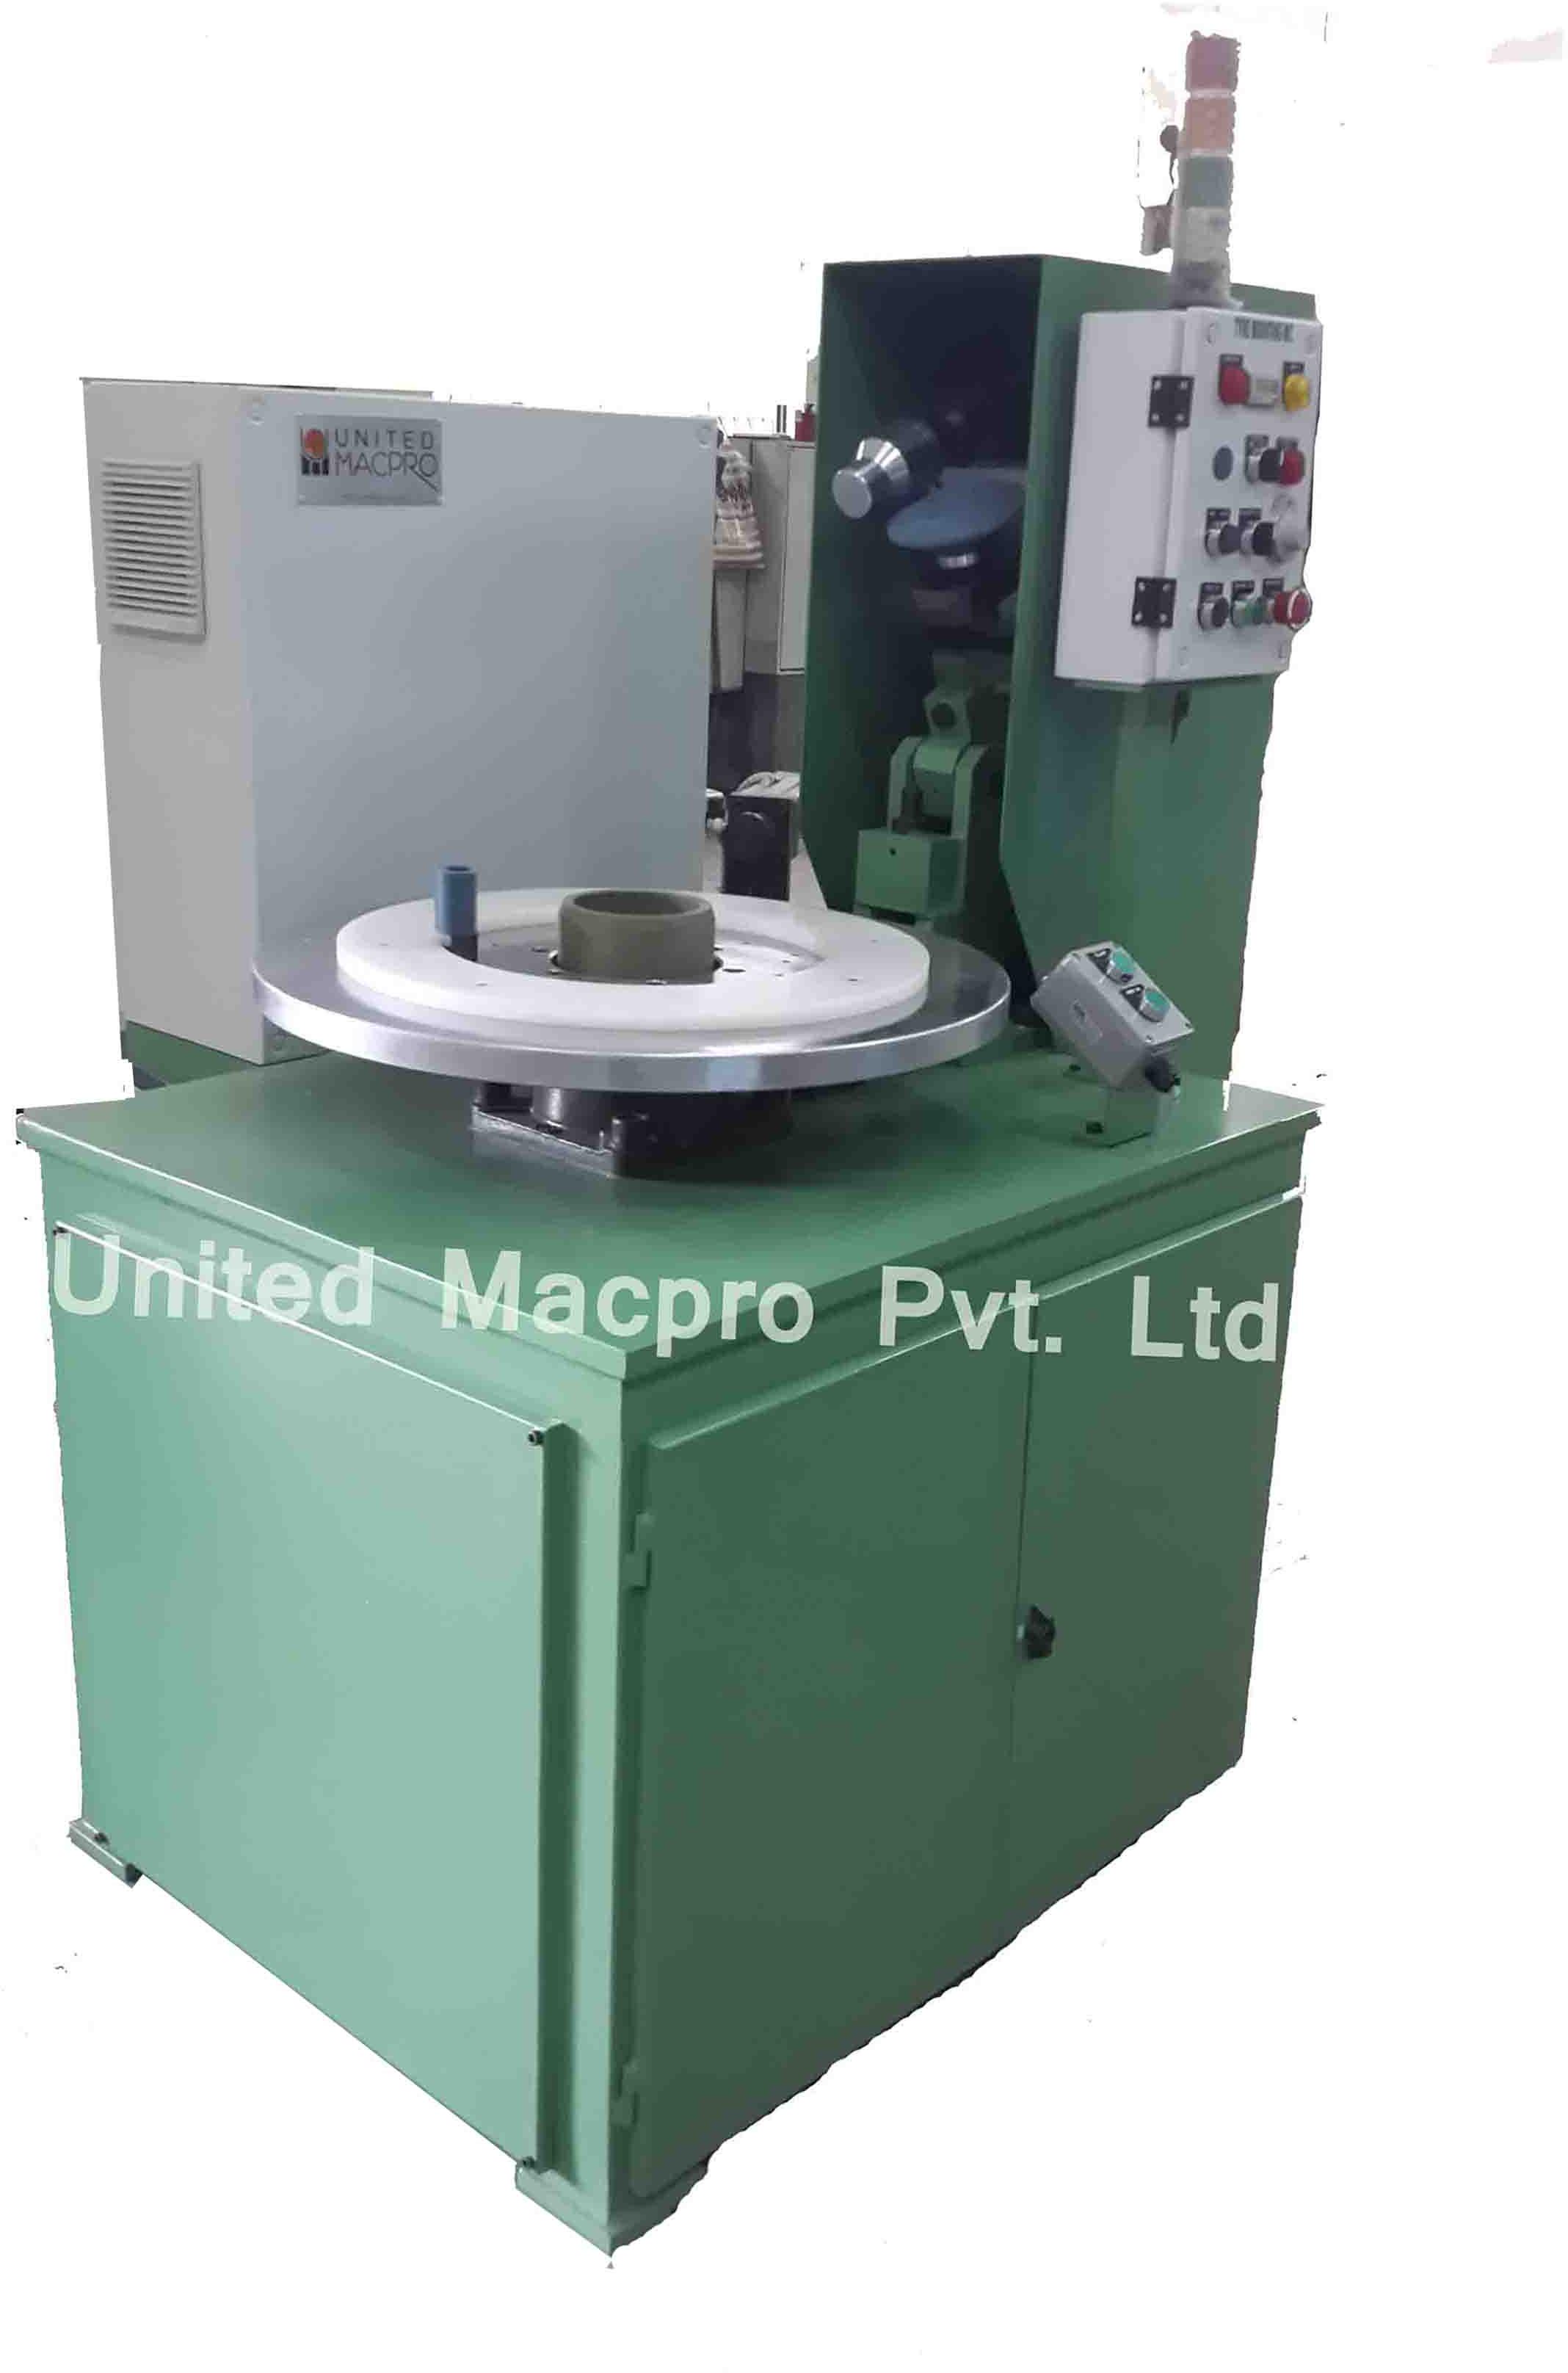 Tyre Mounting Machines